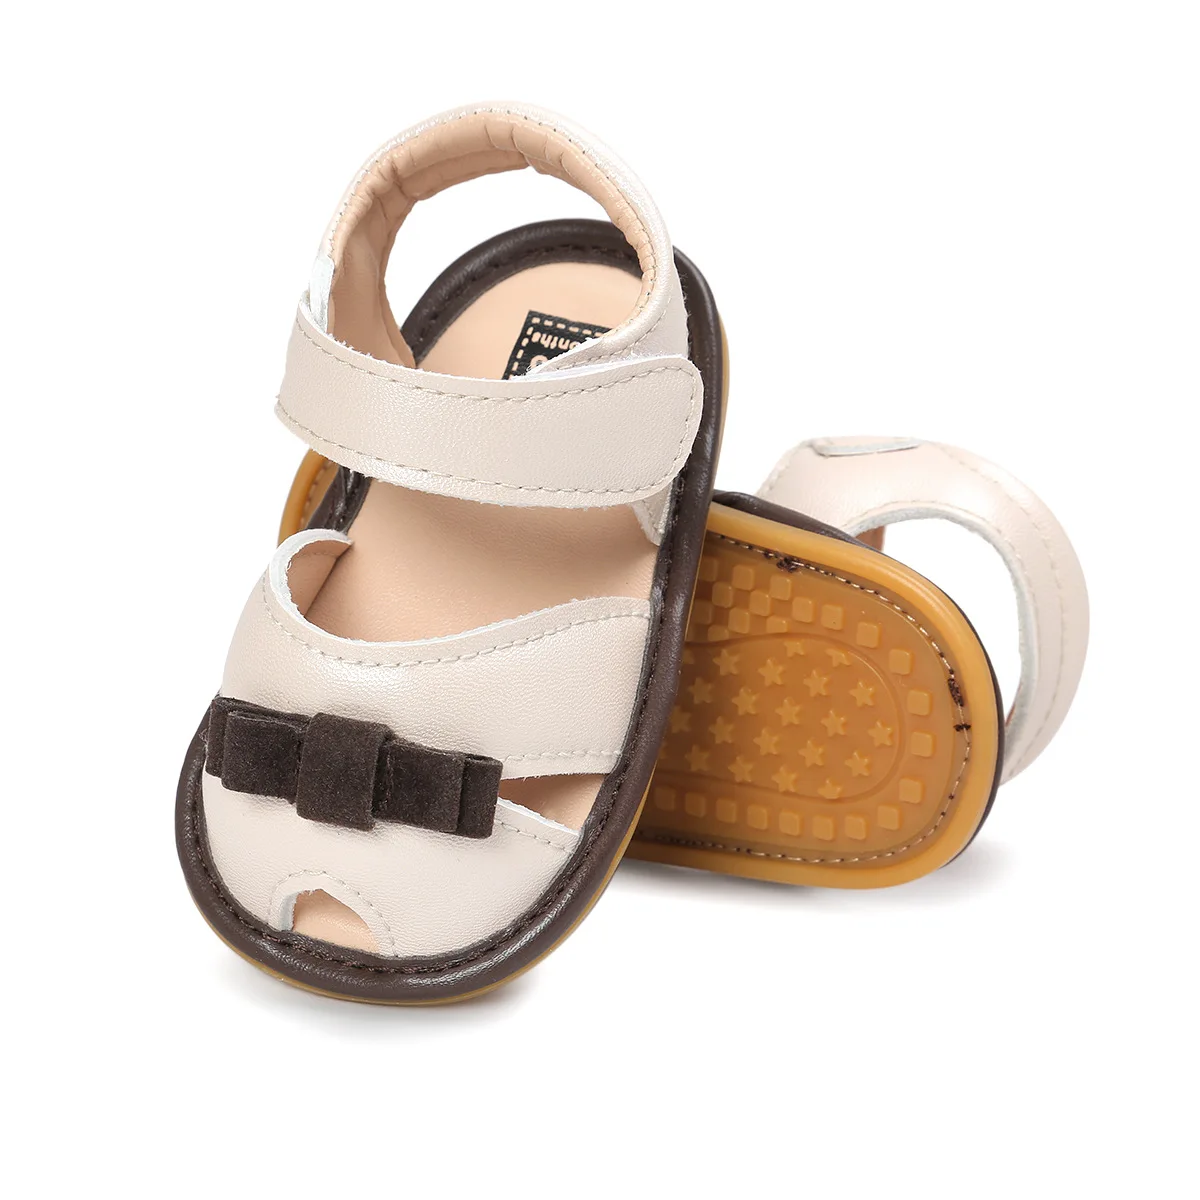 New style fashion PU leather Rubber sole outdoor barefoot Newborn baby girl sandals 2year